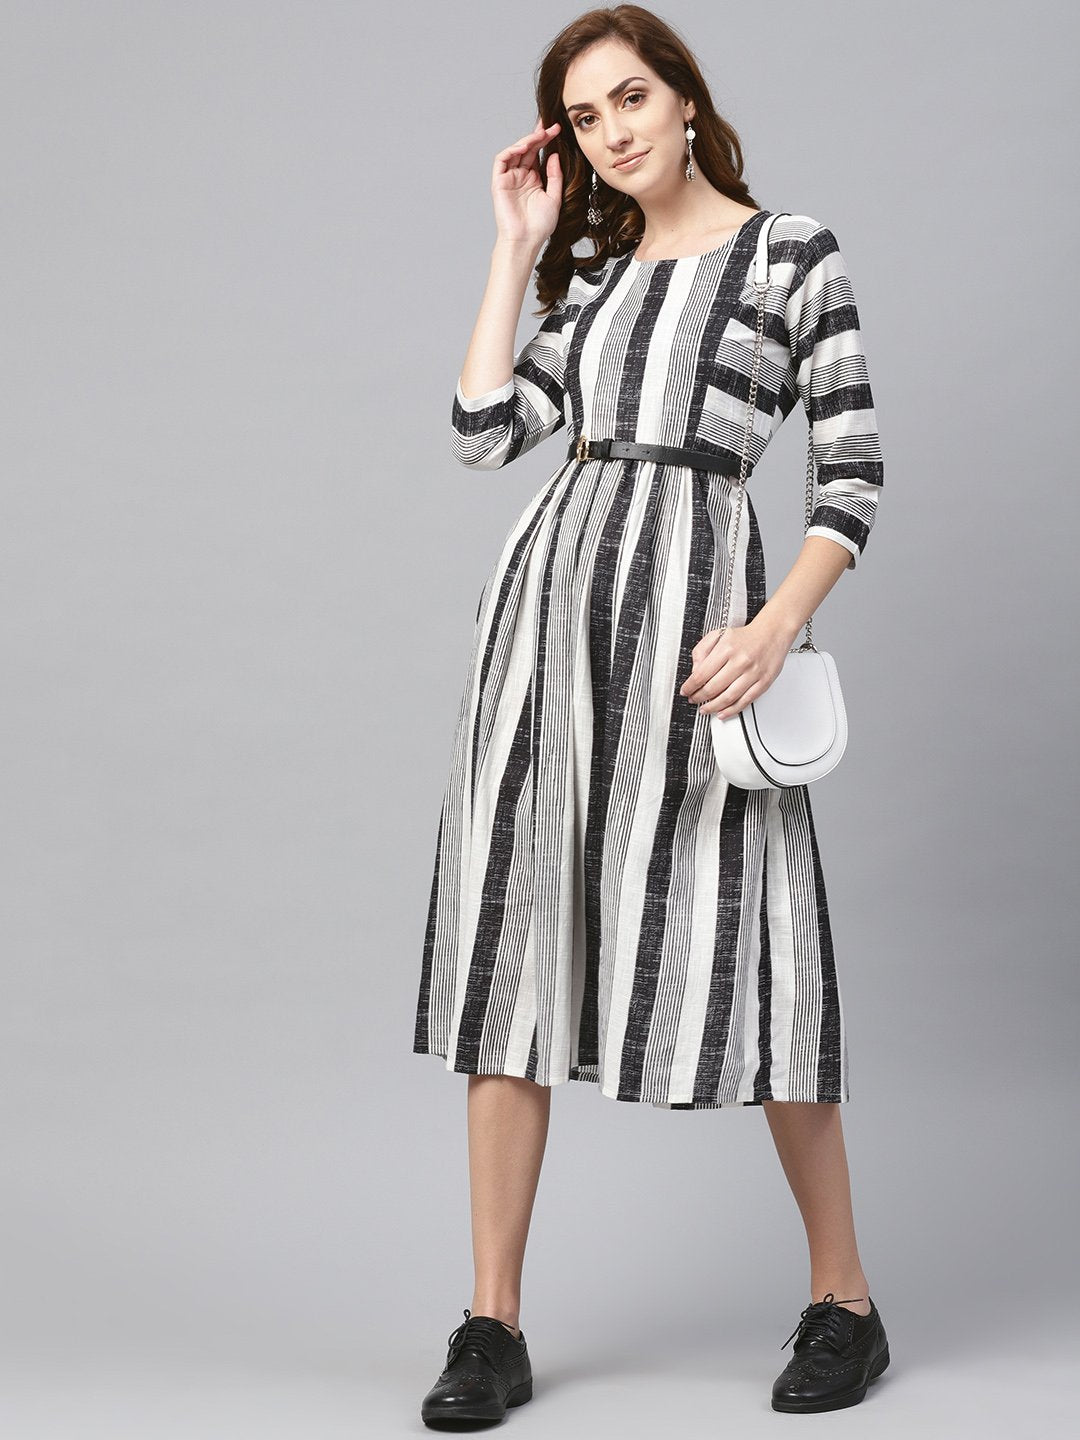 Women's Black & Wihte Stripped Dress With Round Neck & 3/4 Sleeves - Nayo Clothing